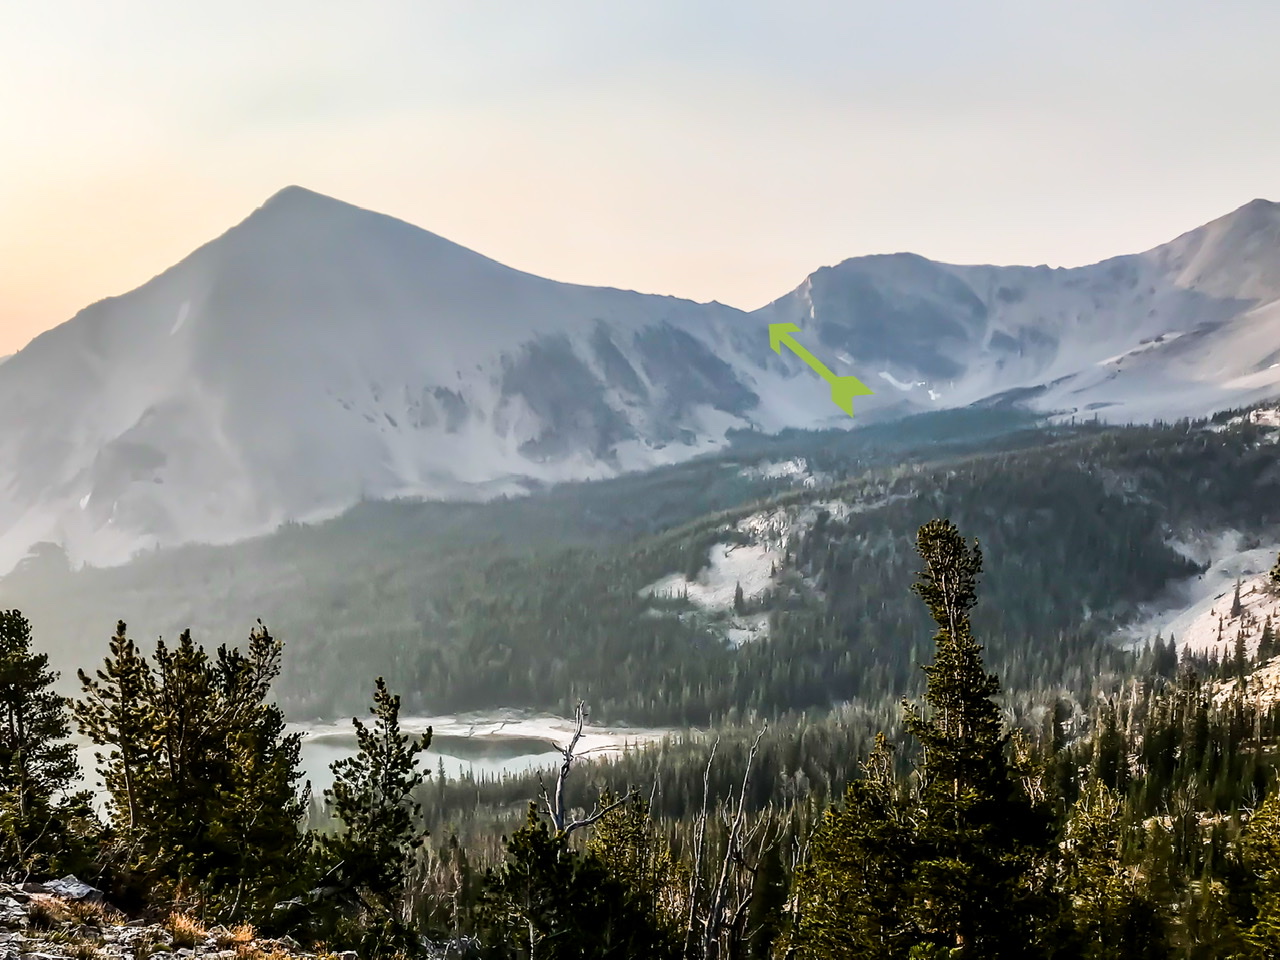 The green arrow shows the gully which leads to the col between The Wedge and The Ledge. The Wedge is on the left. The Ledge is out of sight to the right.